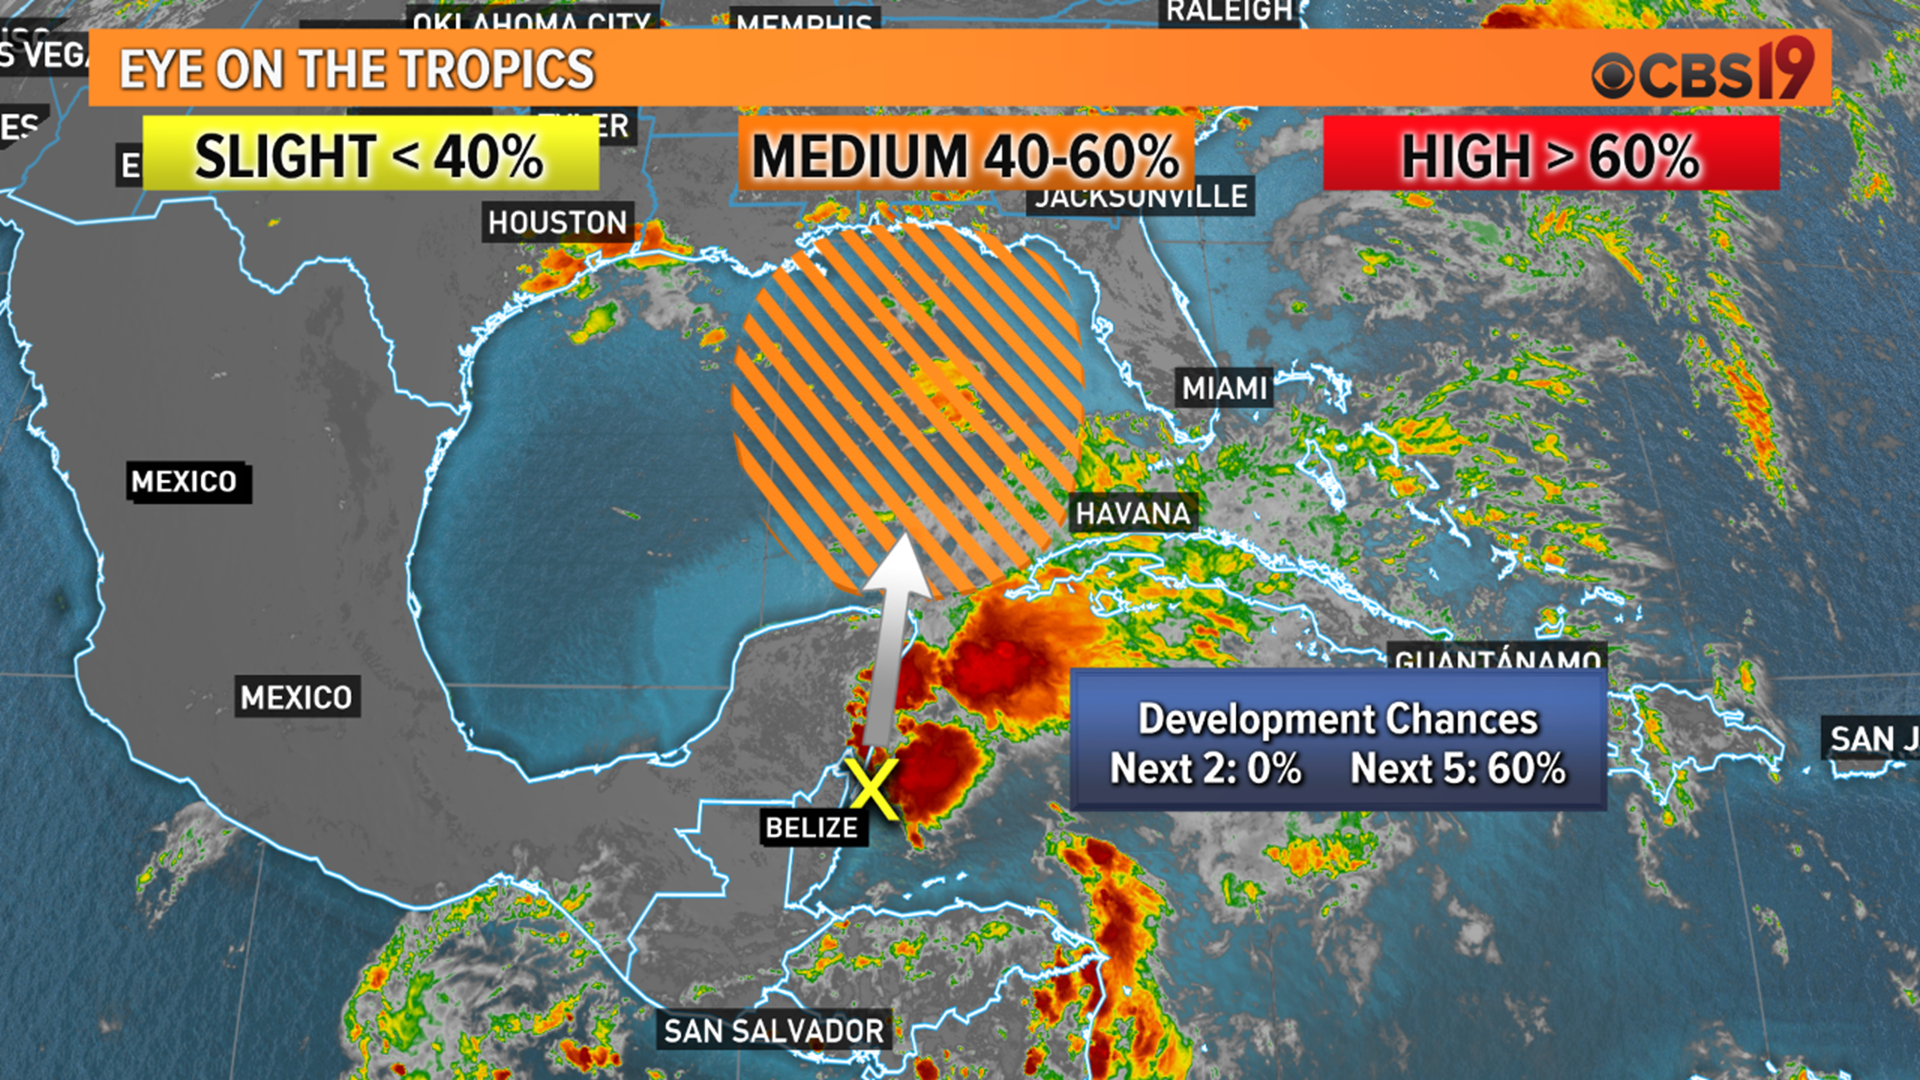 We are watching the tropics for some potential development over the next 5 days. Meteorologist Michael Behrens has his eye on the tropics.